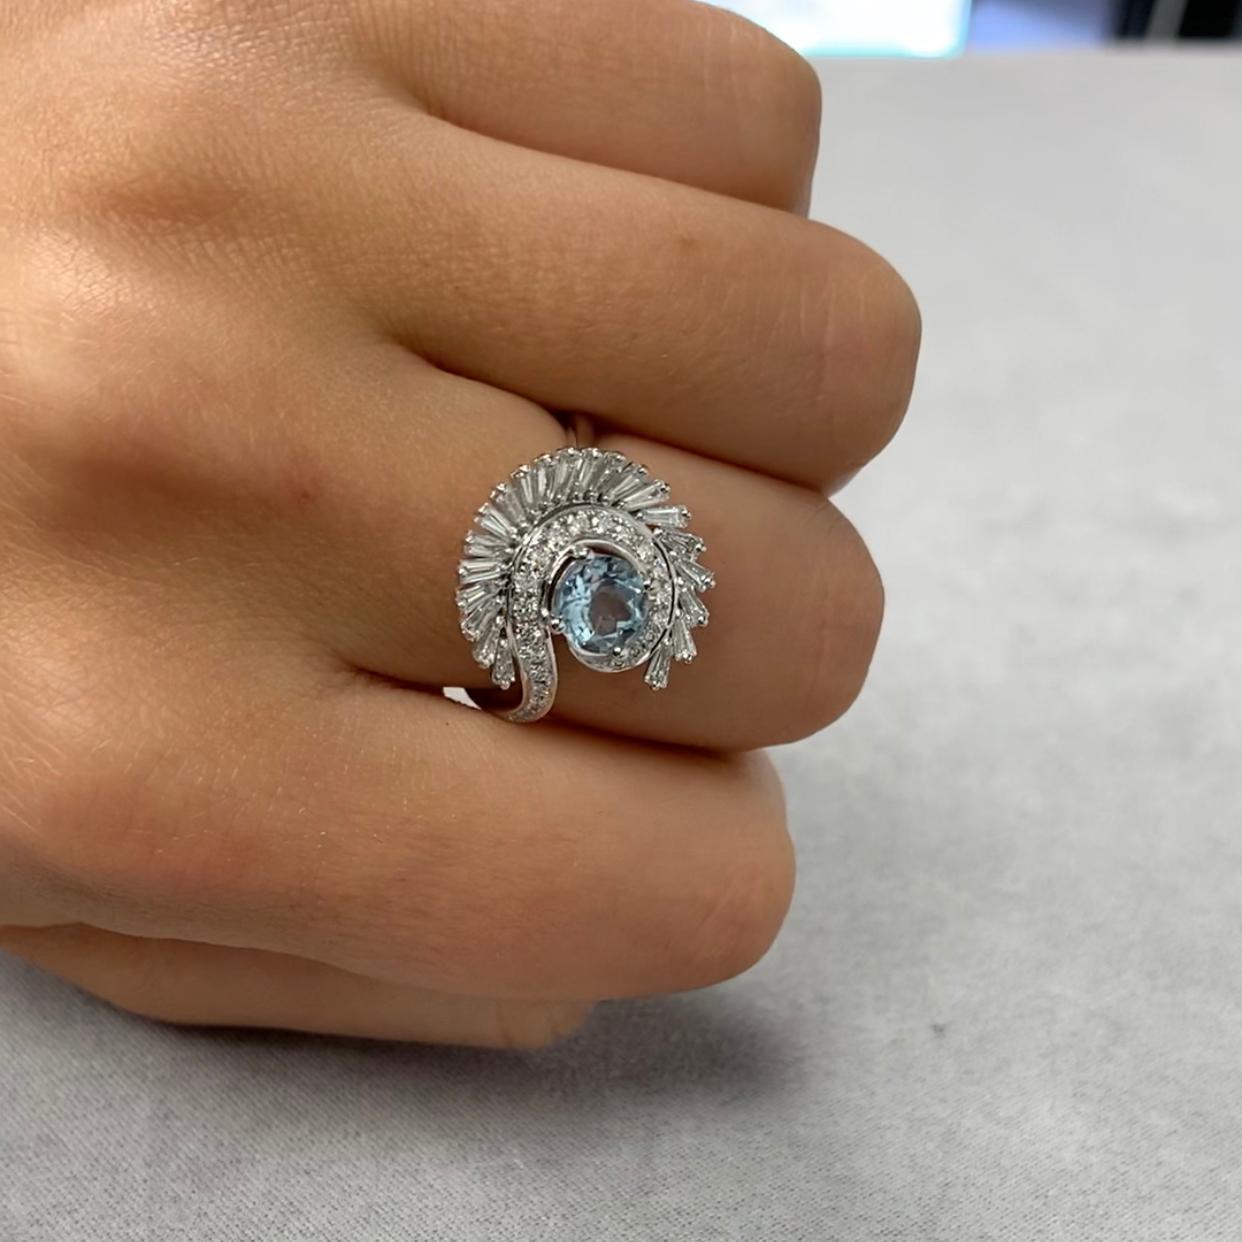 18K White Gold Ring Featuring Round Aquamarine, and Spiral Halo of Round and Baguette Diamonds. Finger size 6.5, adjustable upon request/quote. Aquamarine evokes the purity of crystalline waters, and the exhilaration and relaxation of the sea. Item